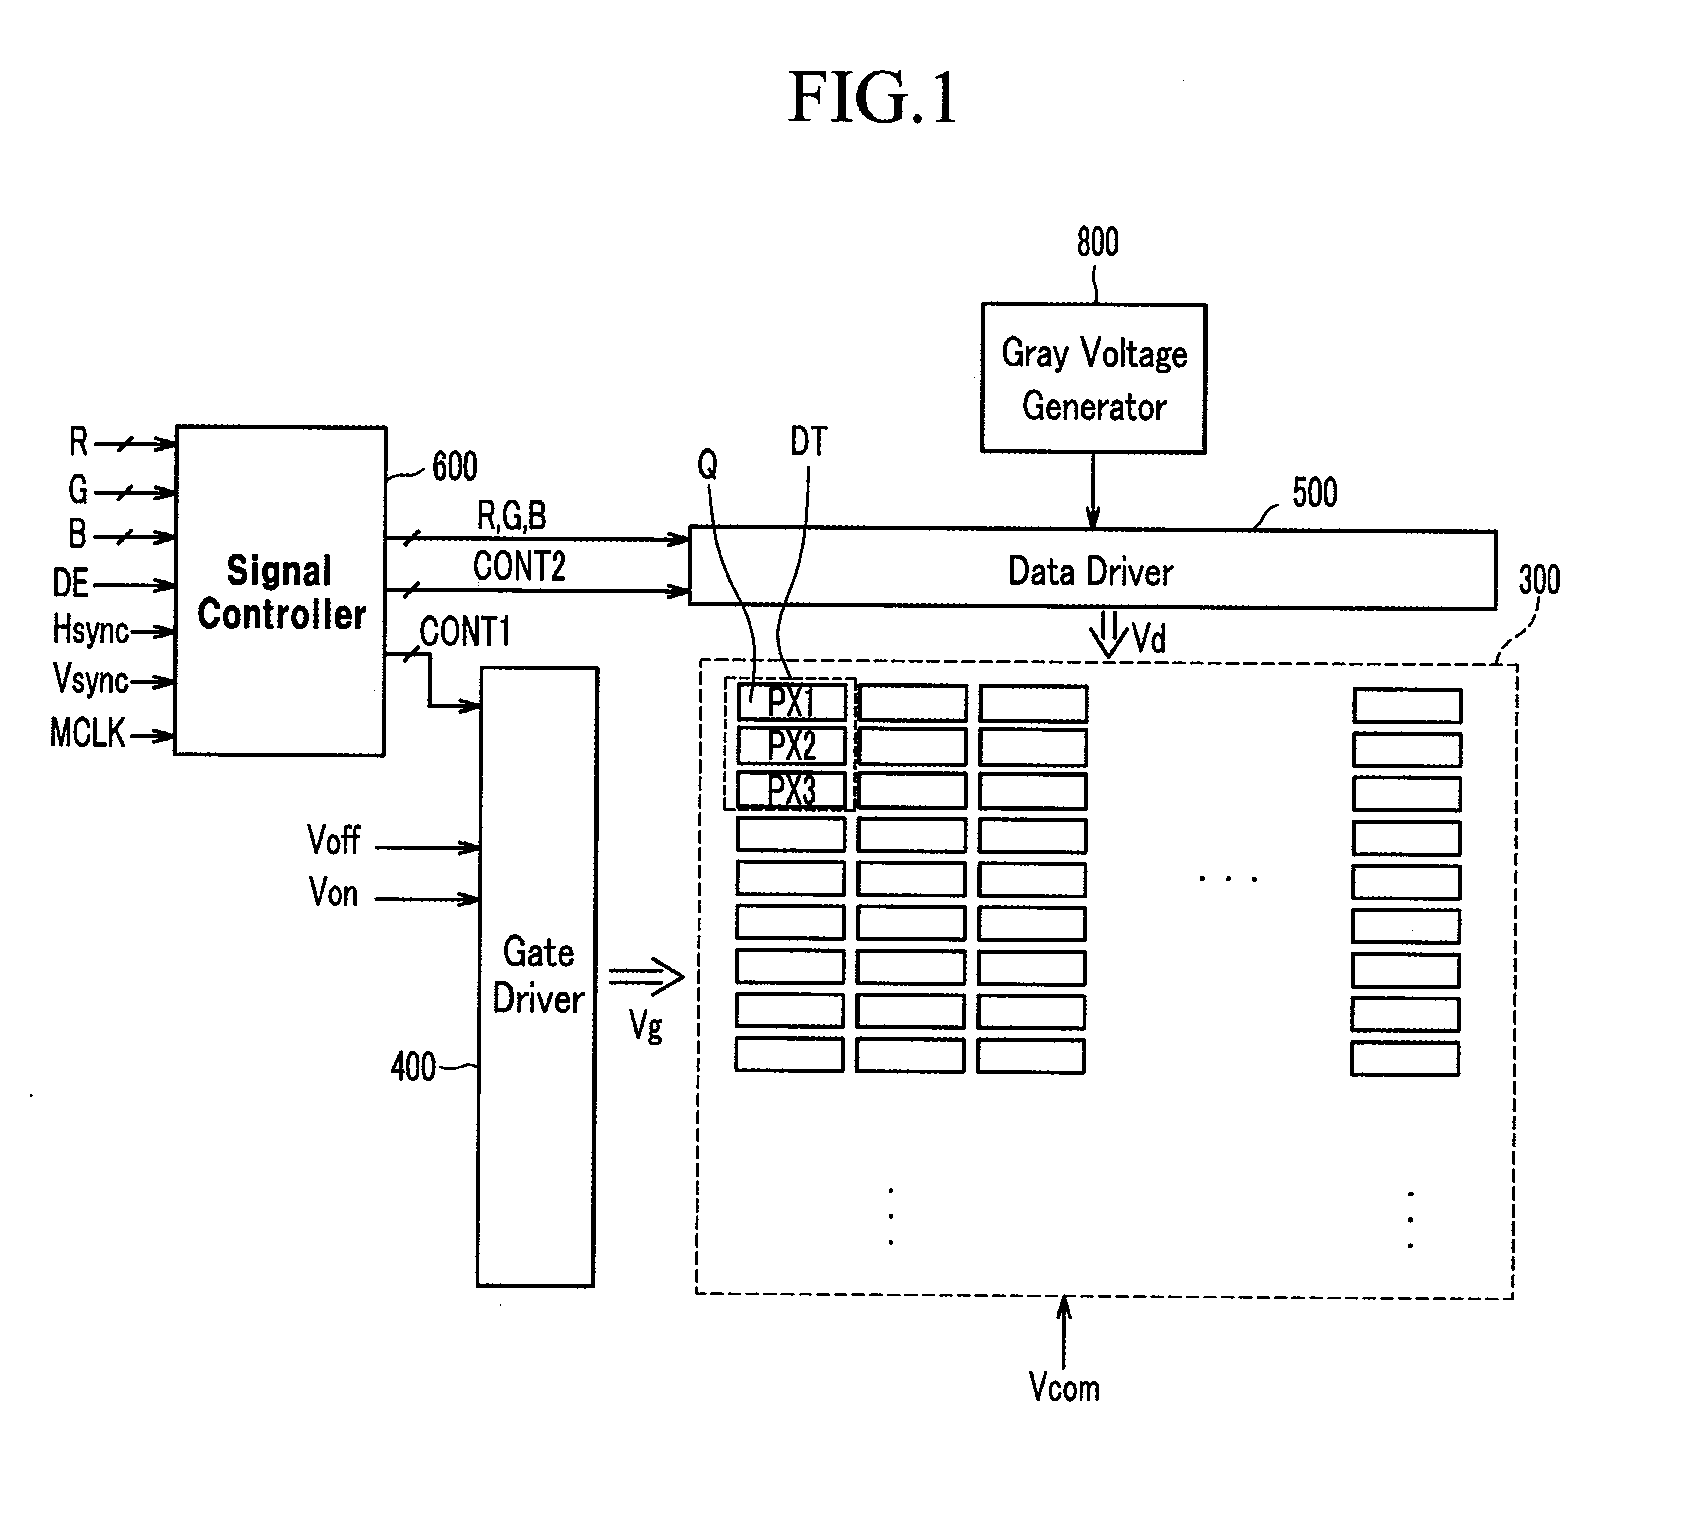 Liquid crystal display having line drivers with reduced need for wide bandwidth switching